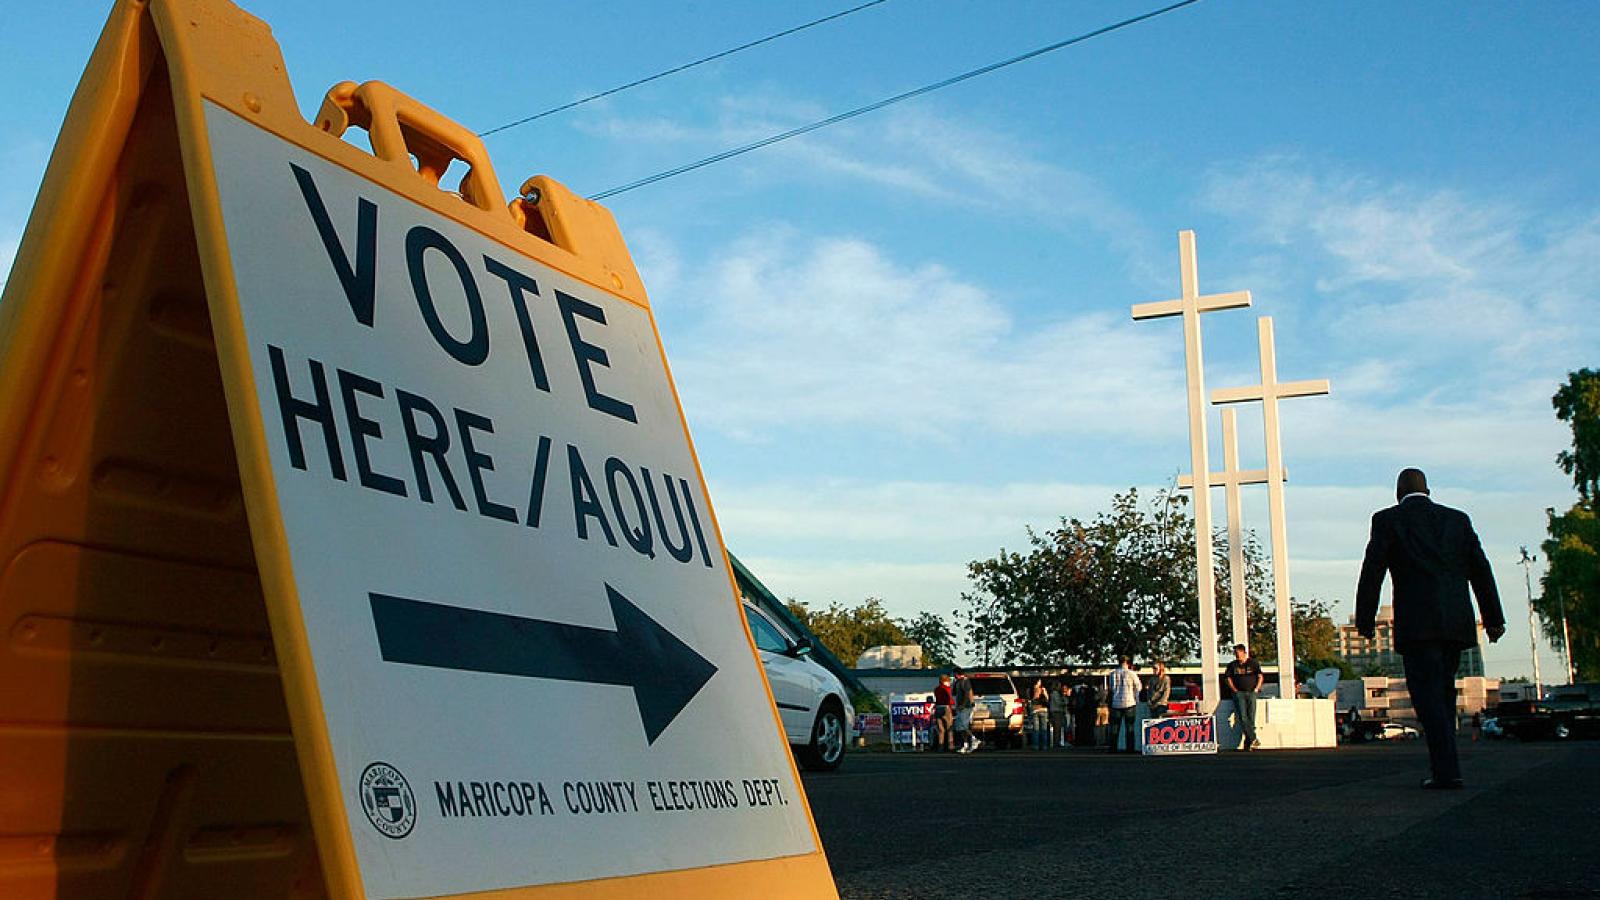 People arrive to vote at church in Arizona in 2008